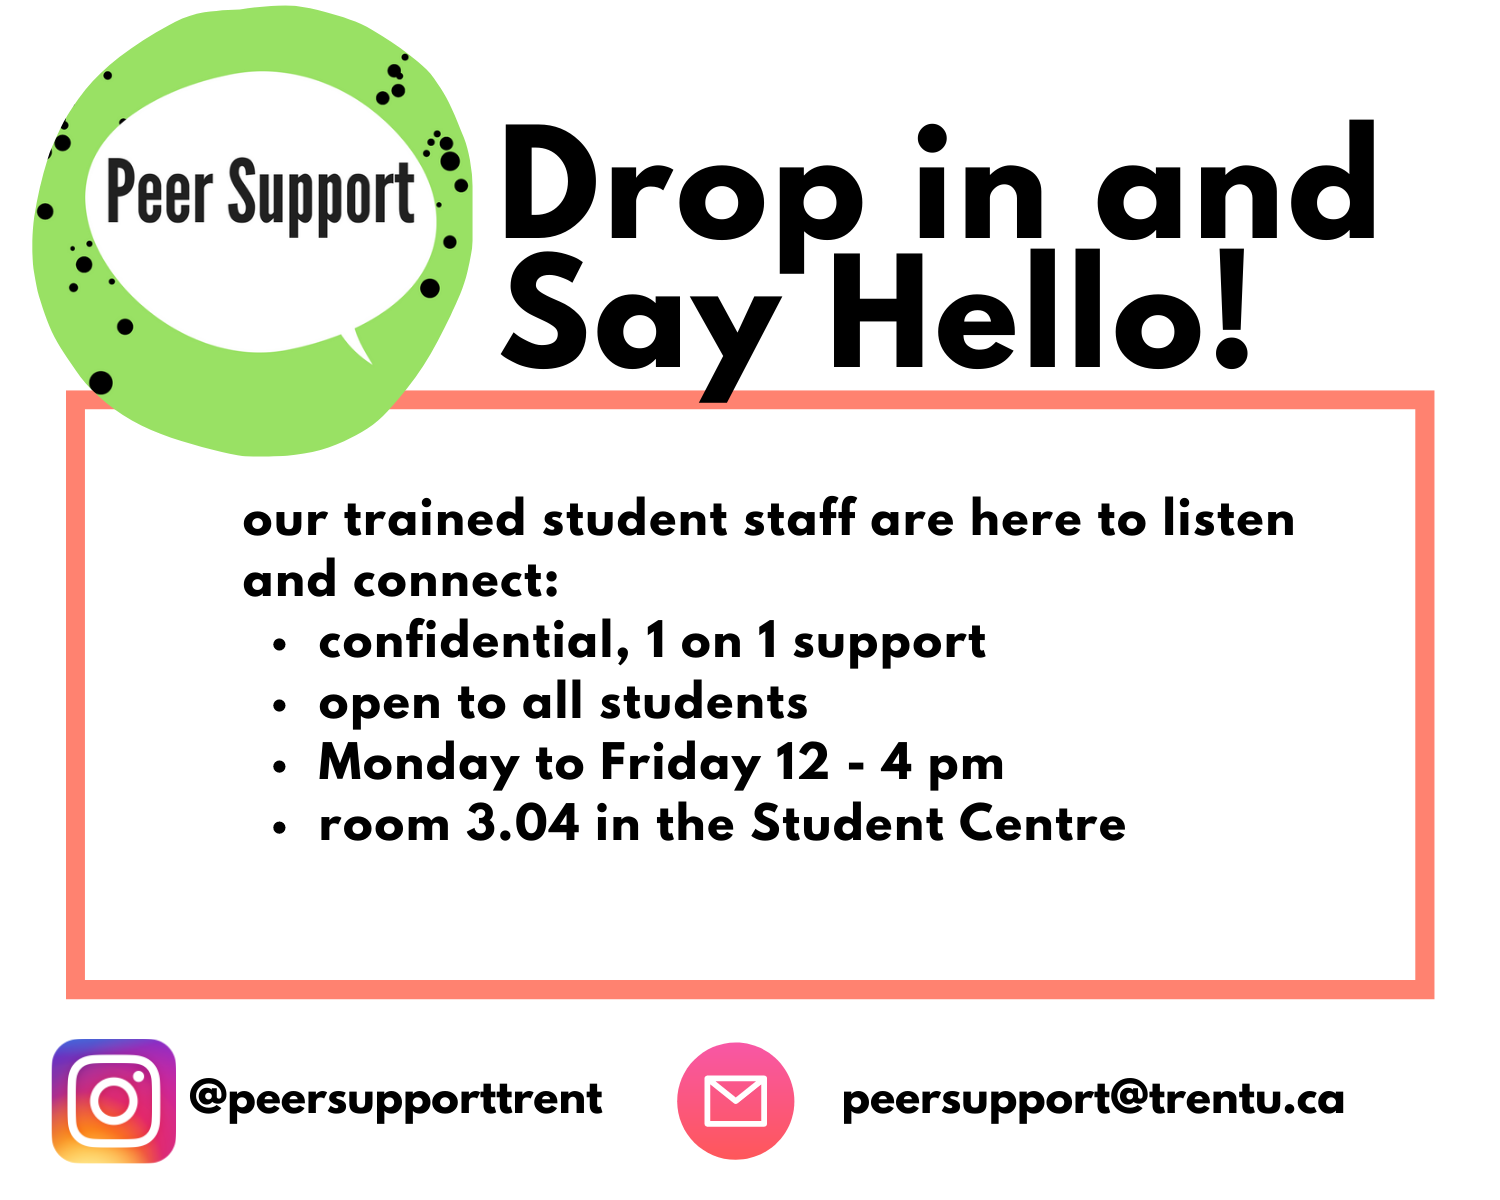 Drop in and say hello! Our trained staff are here to listen and connect: confidential one on one support, open to all students, Monday to Friday from 12 to 4 p.m., room 3.04 in the Student Centre.